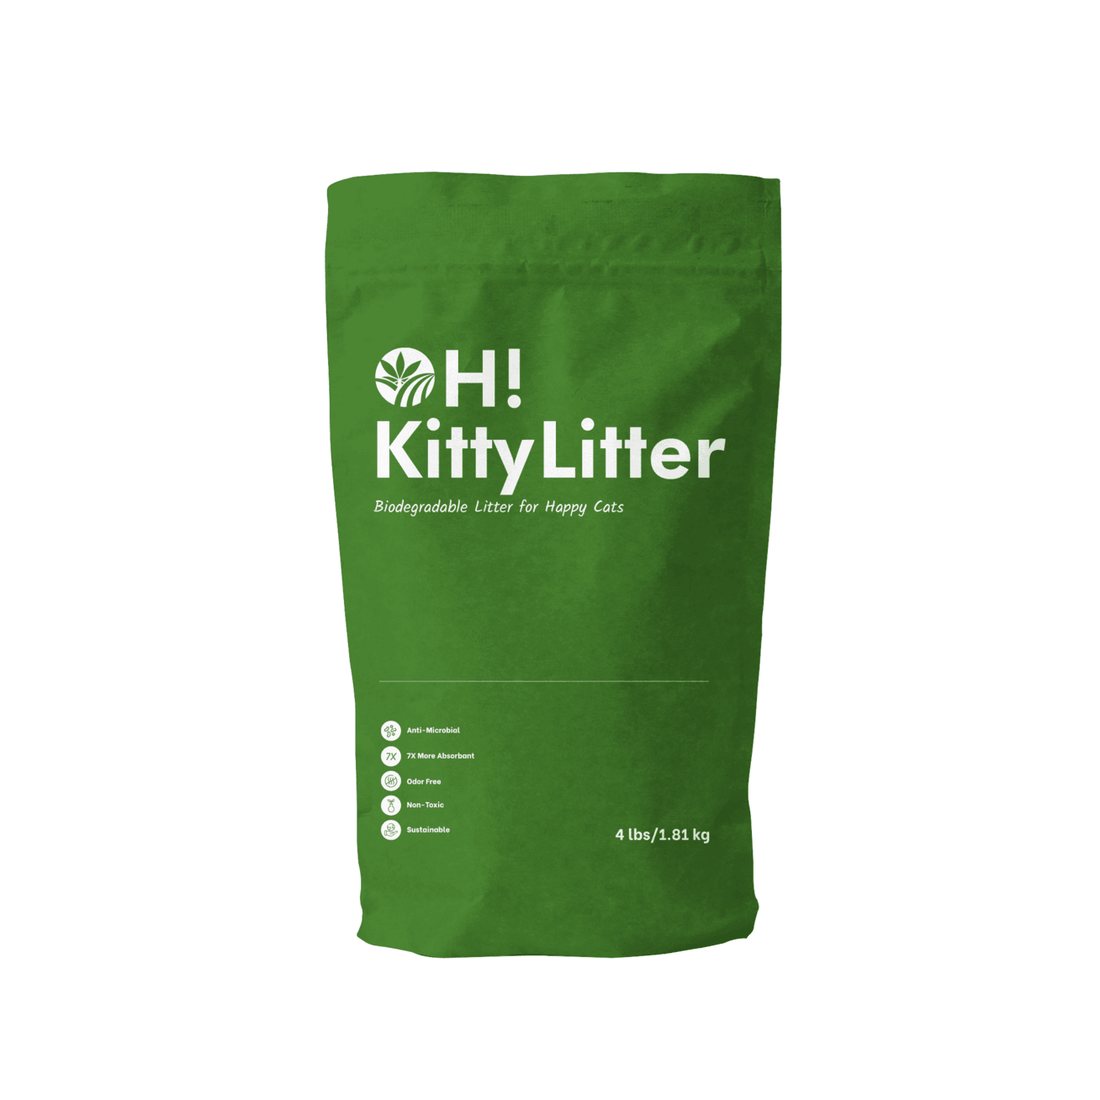 All-Natural Cat Litter made from USDA Organic Hemp - Oley Health and Wellness